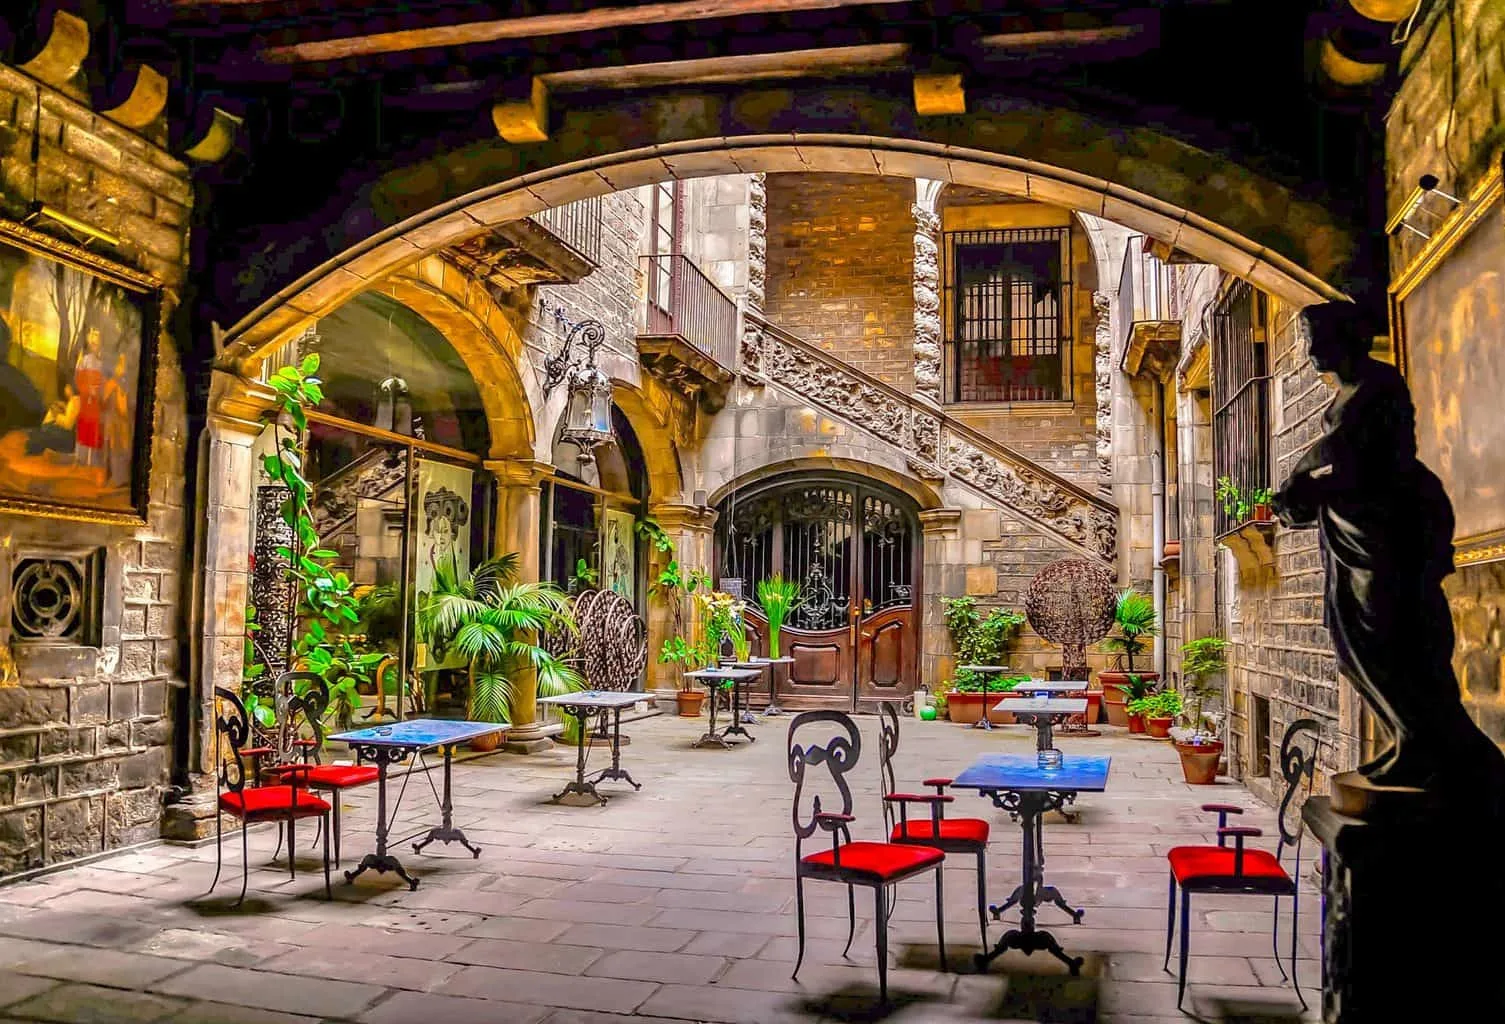 The charming, Baroque courtyard of Barcelona's Palau Dalmases (image sourced from Flickr.com) 